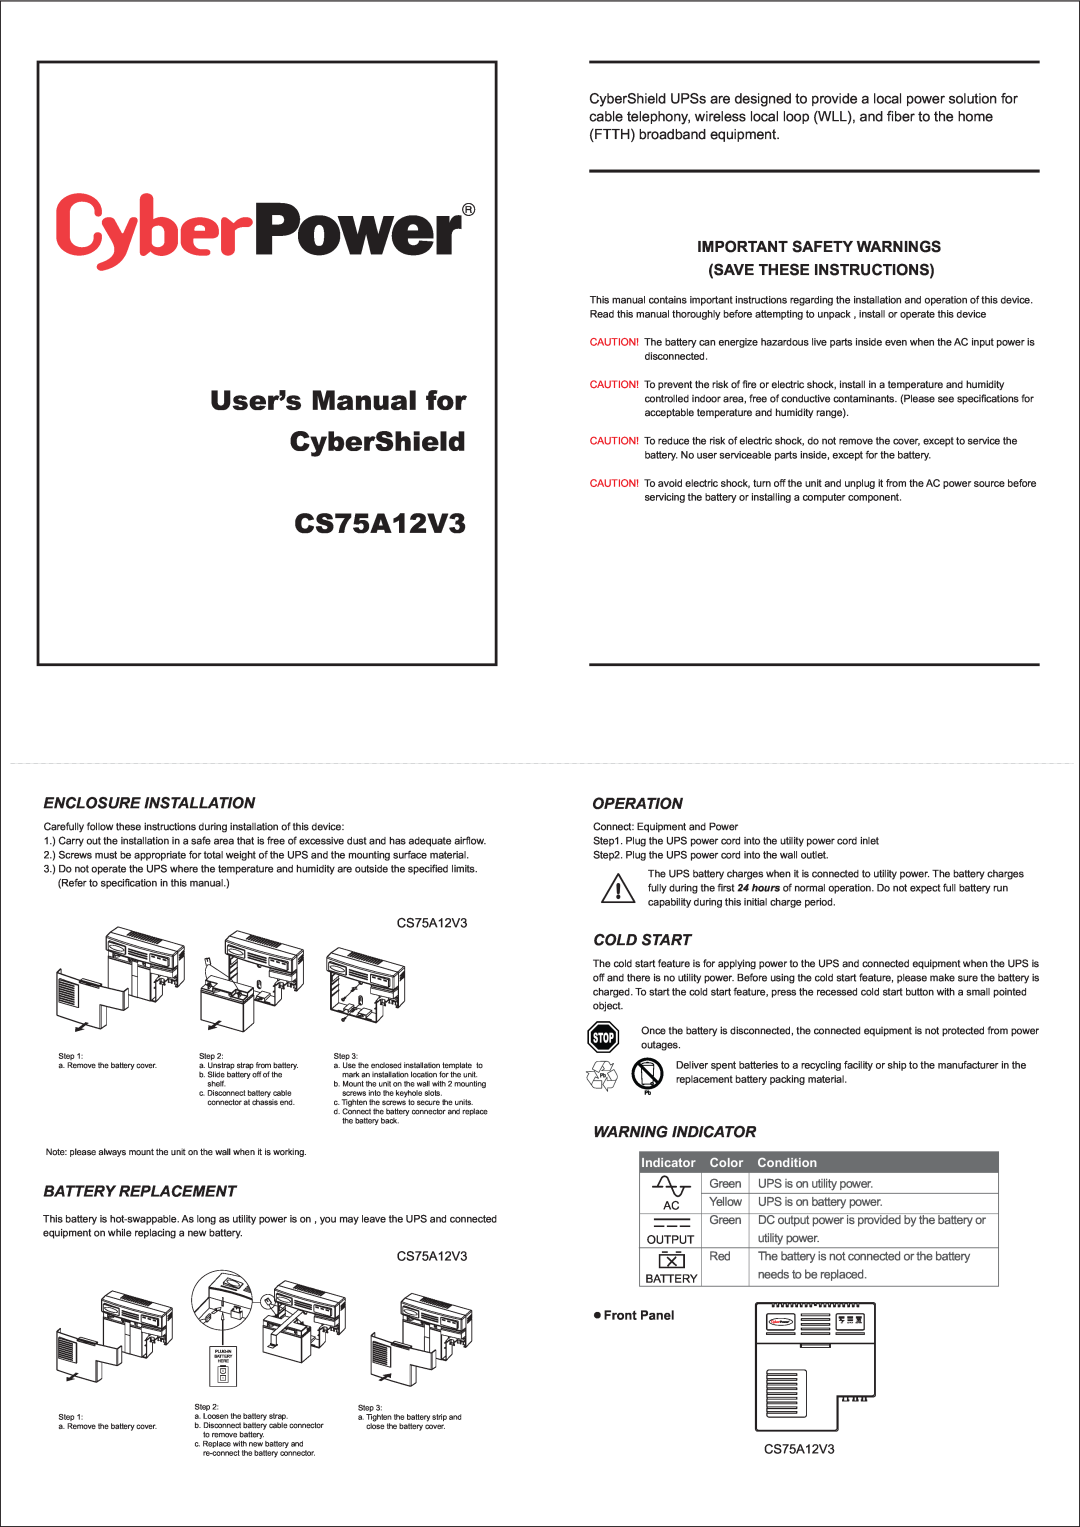 CyberPower Systems CS75A12V3 user manual Enclosure Installation, Operation, Battery Replacement, Cold Start, Condition 